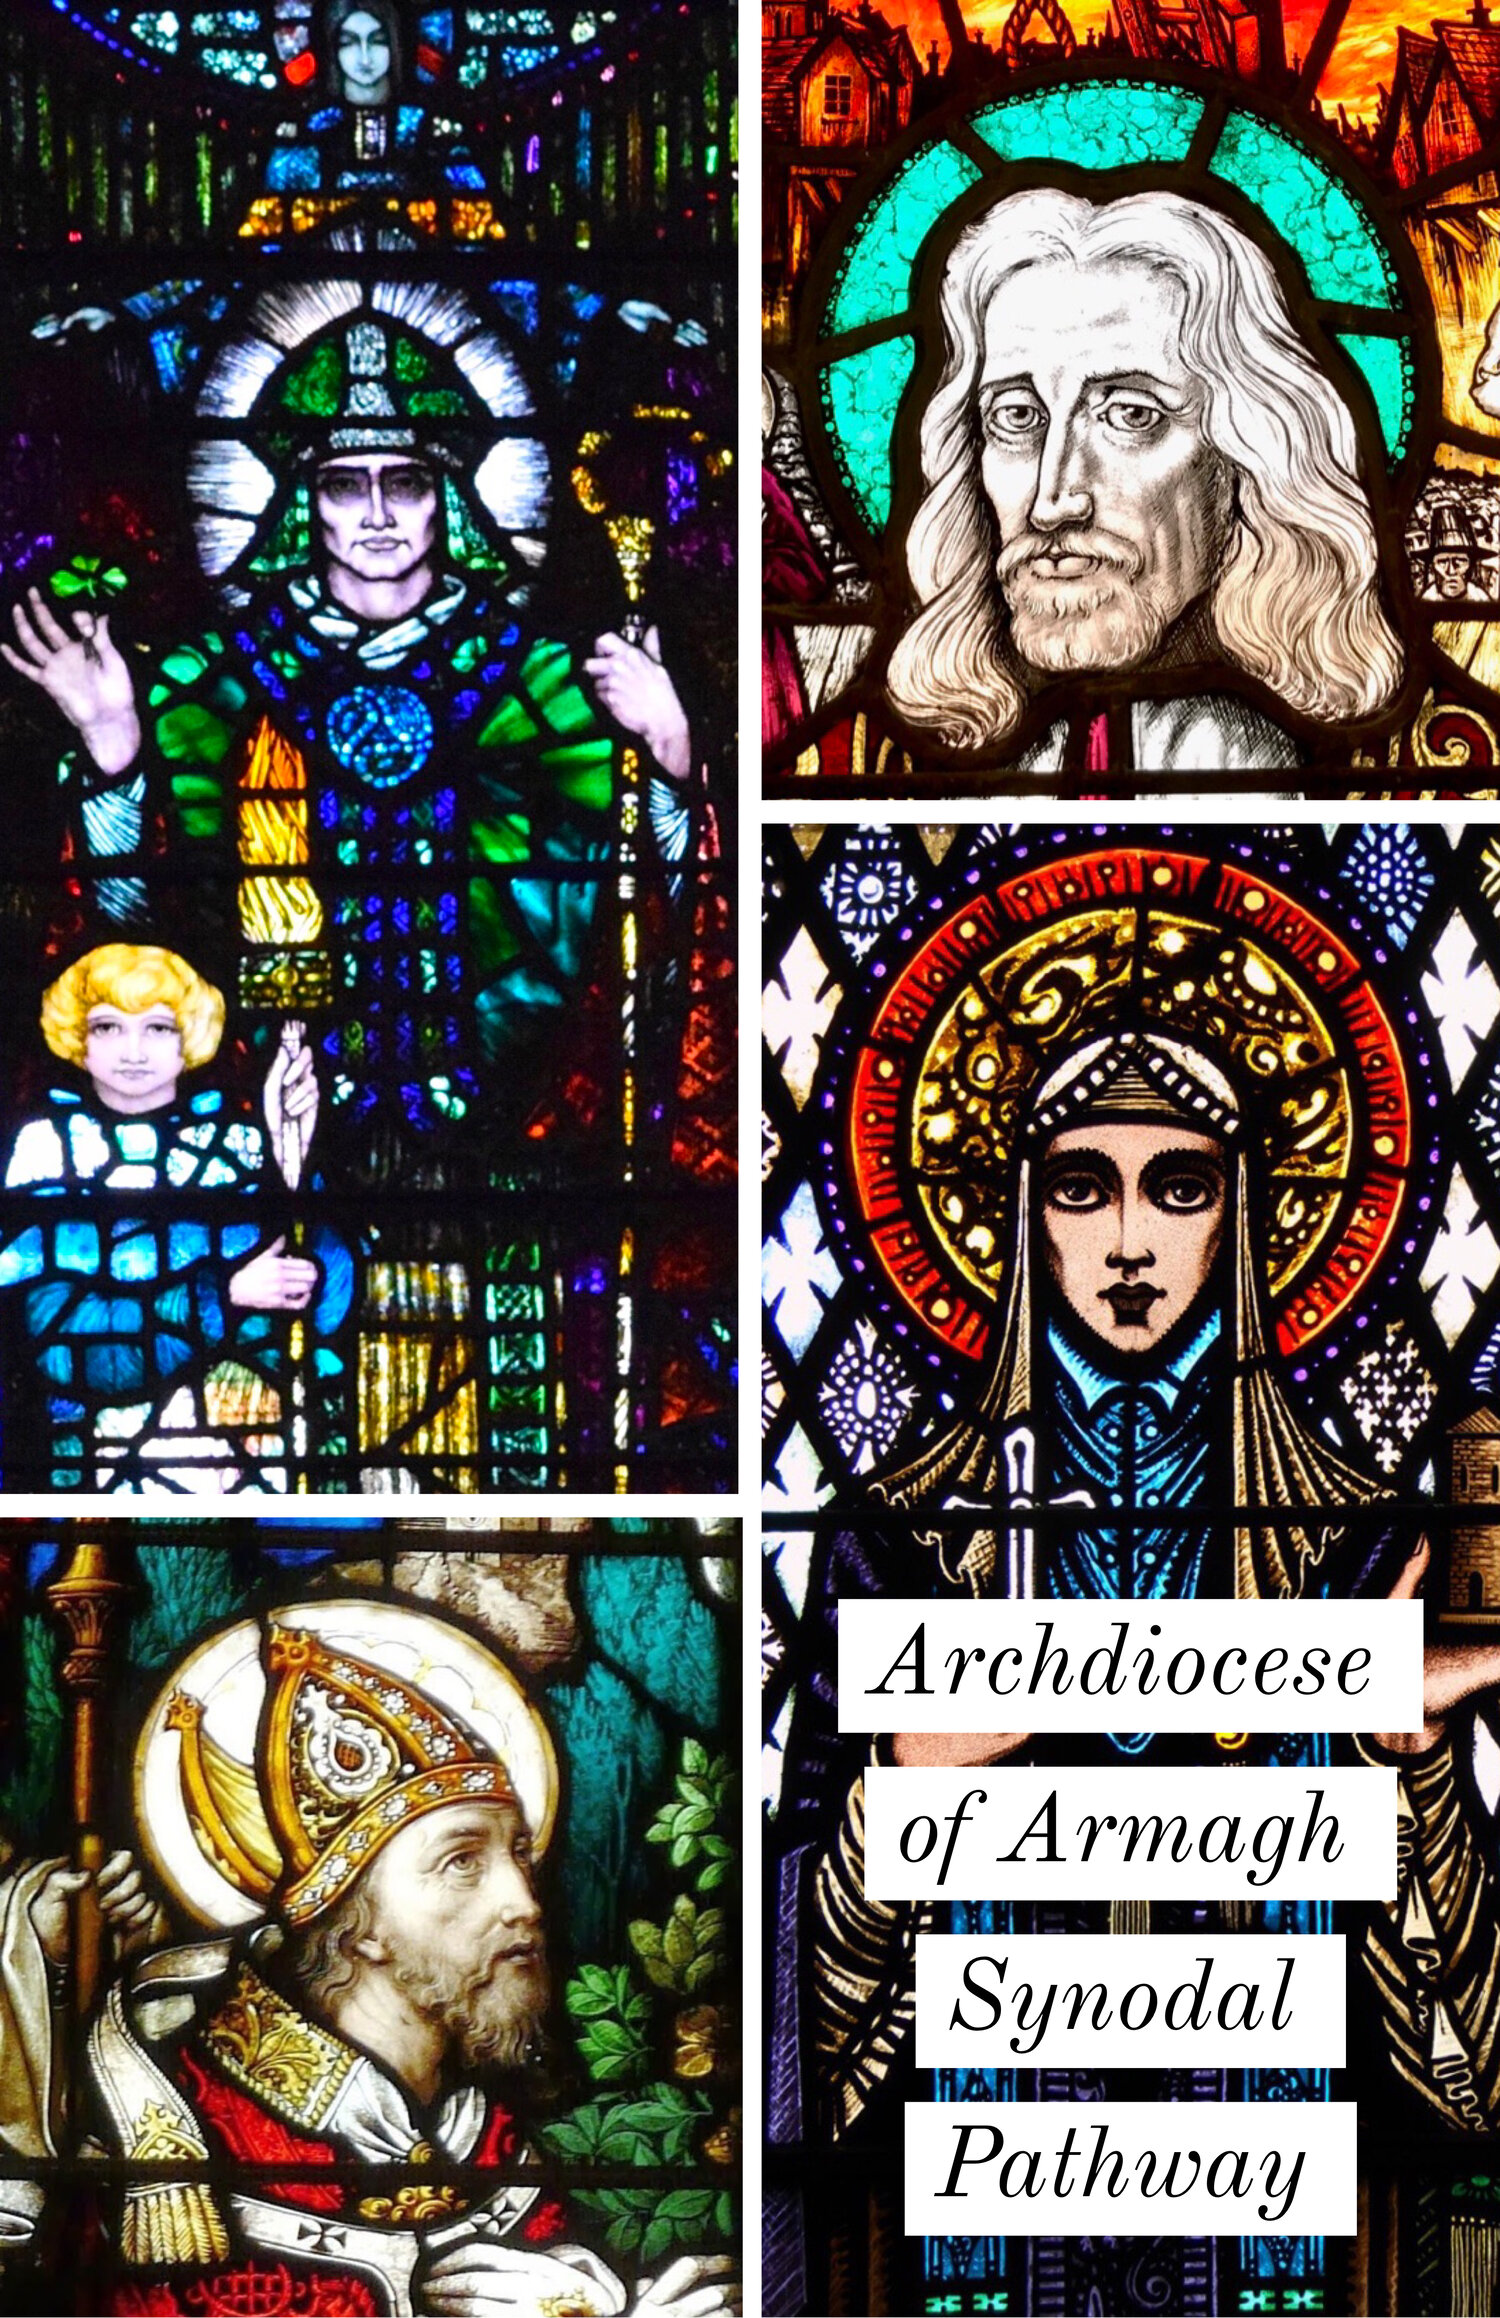 Archdiocese of Armagh, Pastoral Resources